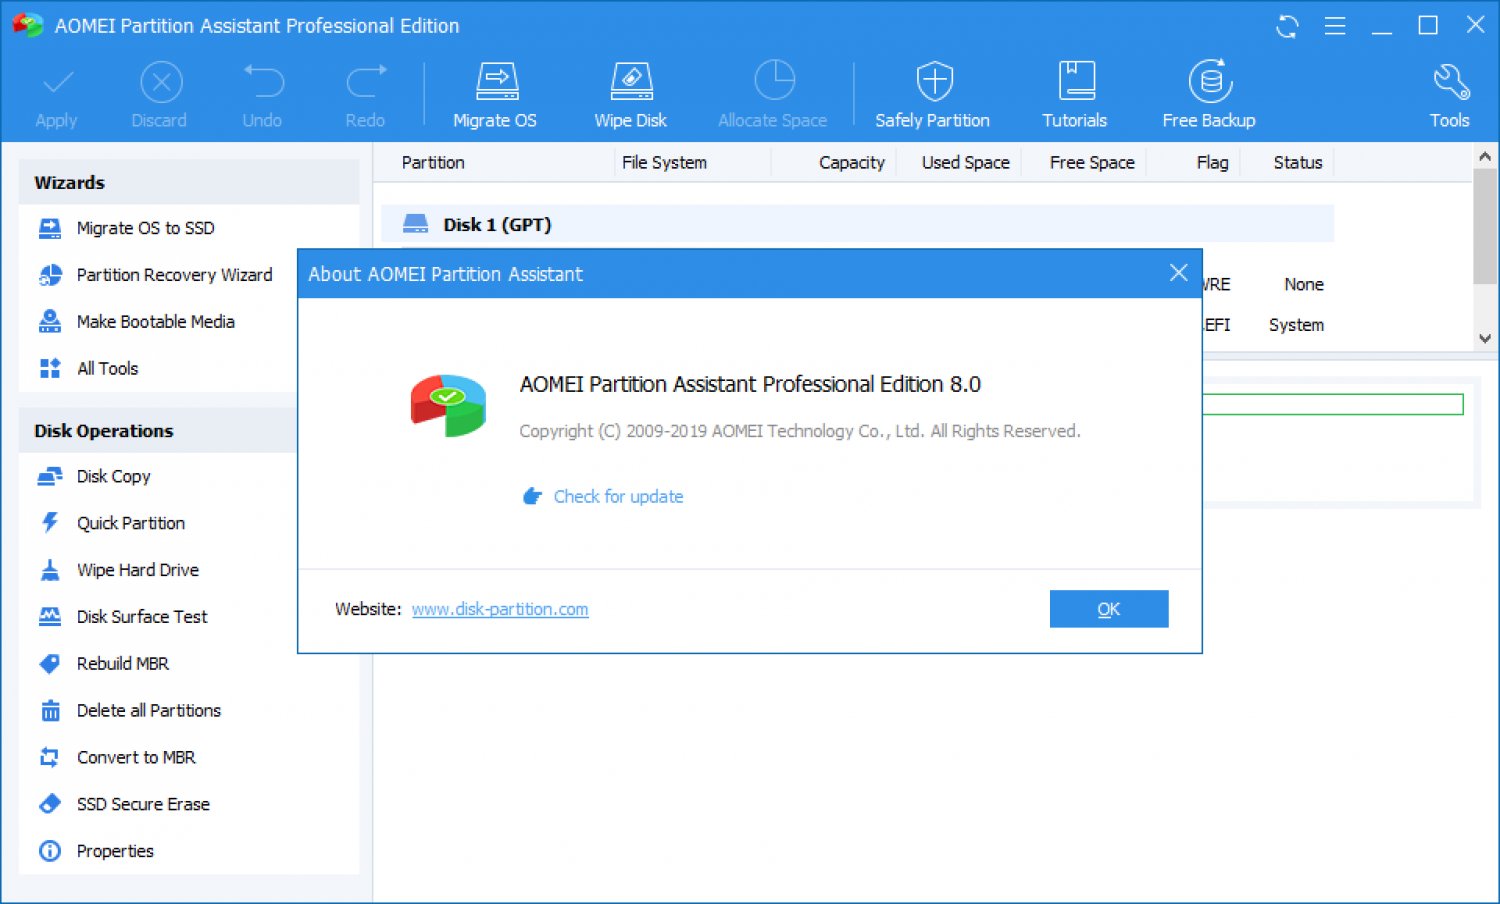 aomei partition assistant pro edition 5.5 will not install